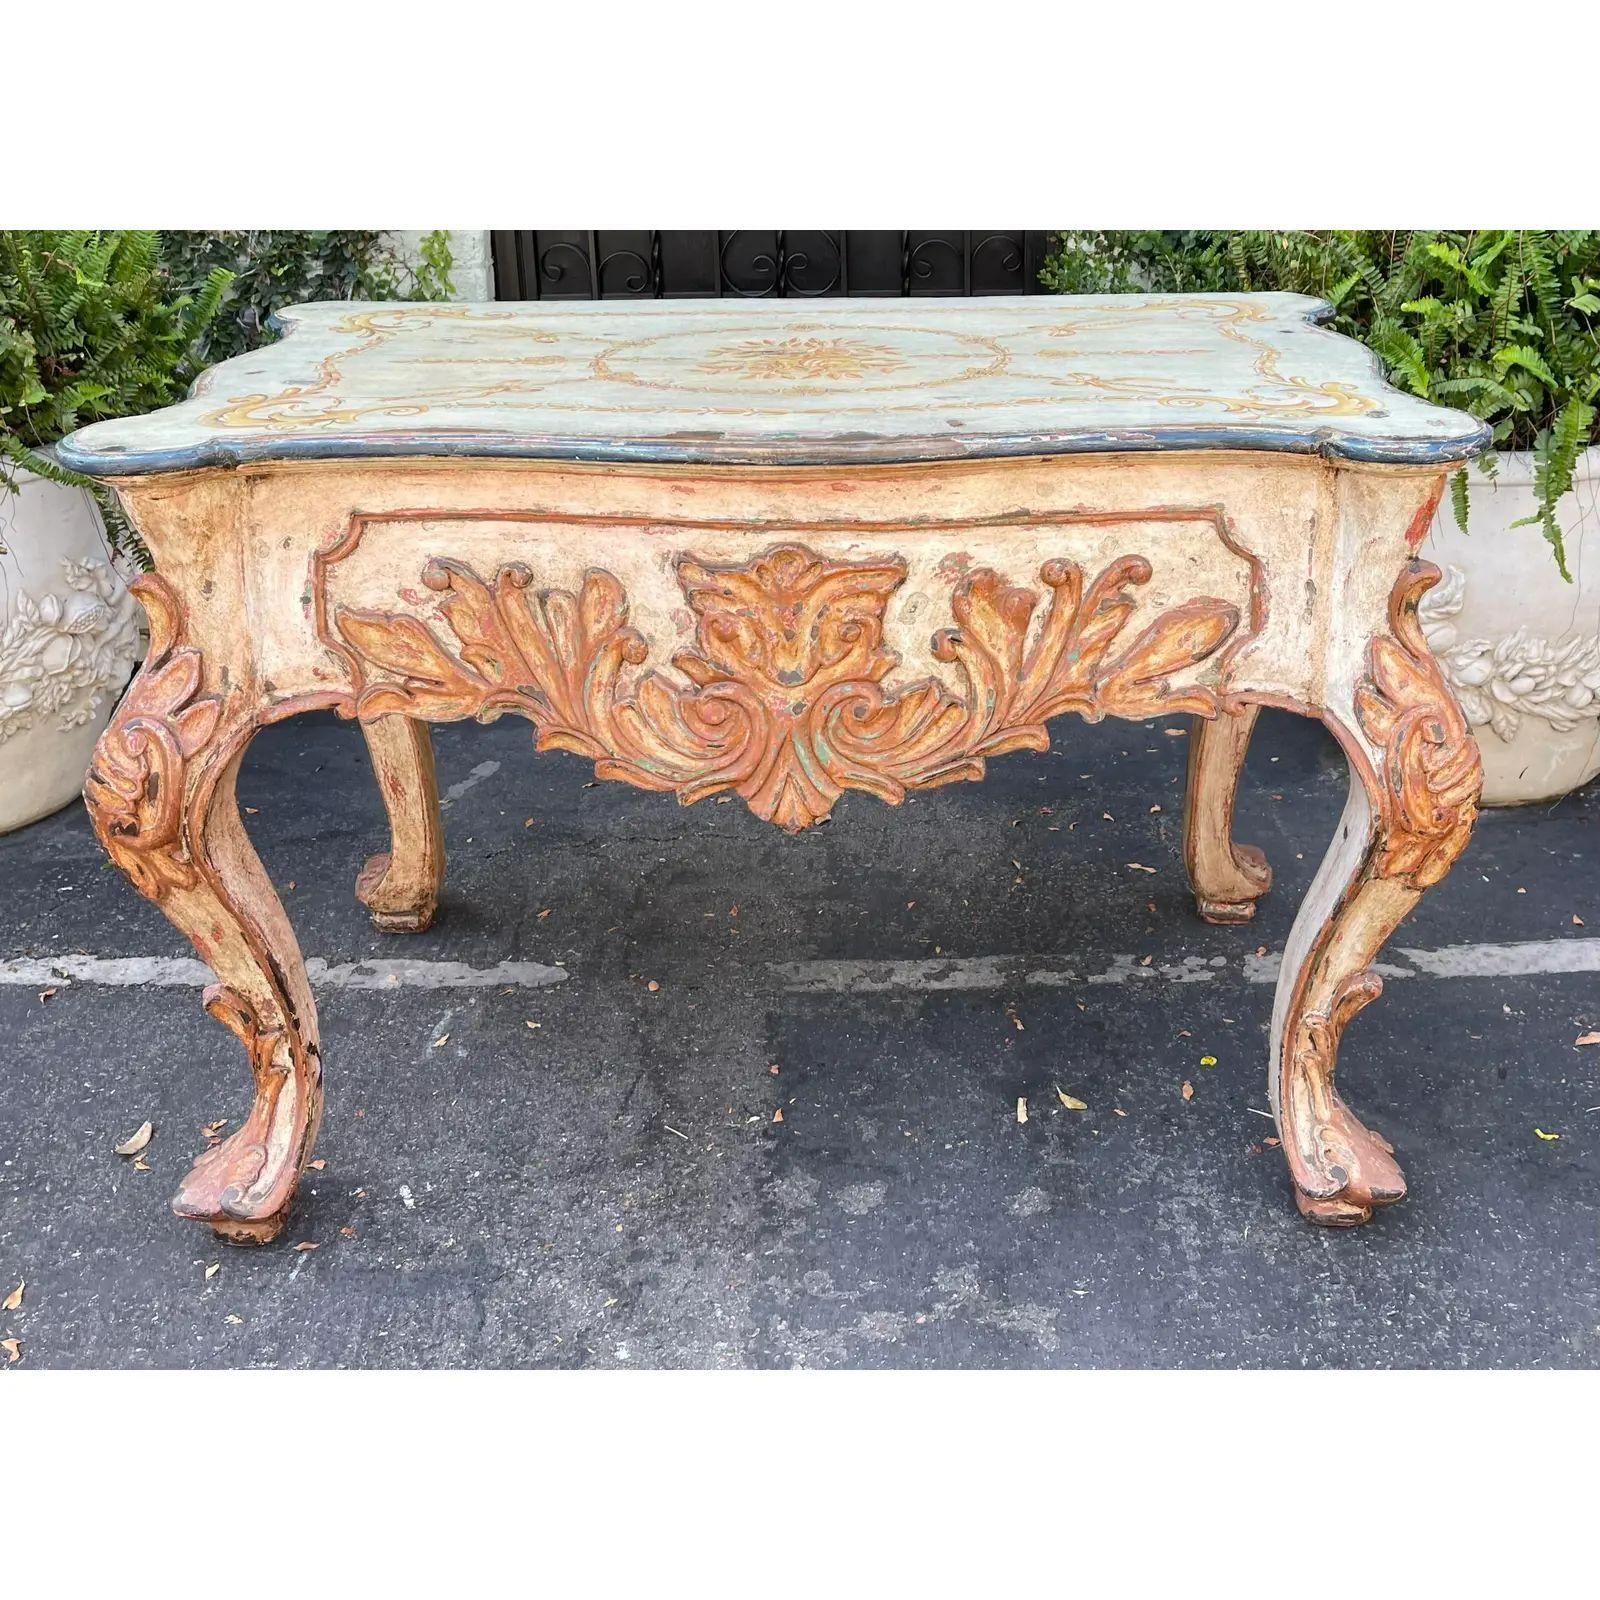 Quatrain for Dessin Fournir carved venetian style Italian paint decorated table

Additional information: 
Materials: Paint, Wood
Color: Blue
Brand: Dessin Fournir
Designer: Dessin Fournir
Period: 1980s
Styles: Italian, Rococo
Table Shape: